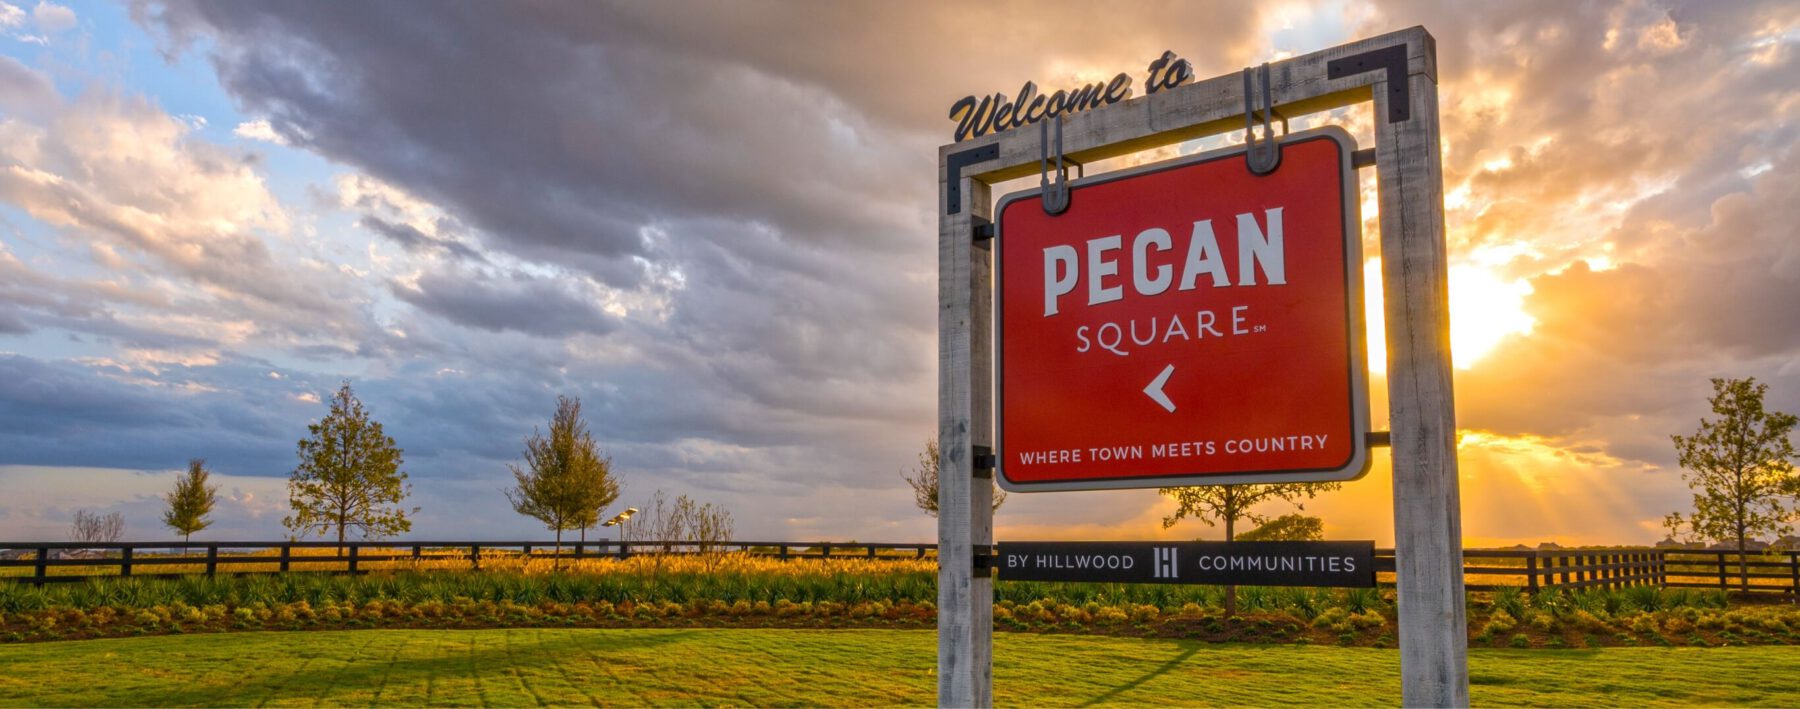 The sign at the entrance to Pecan Square